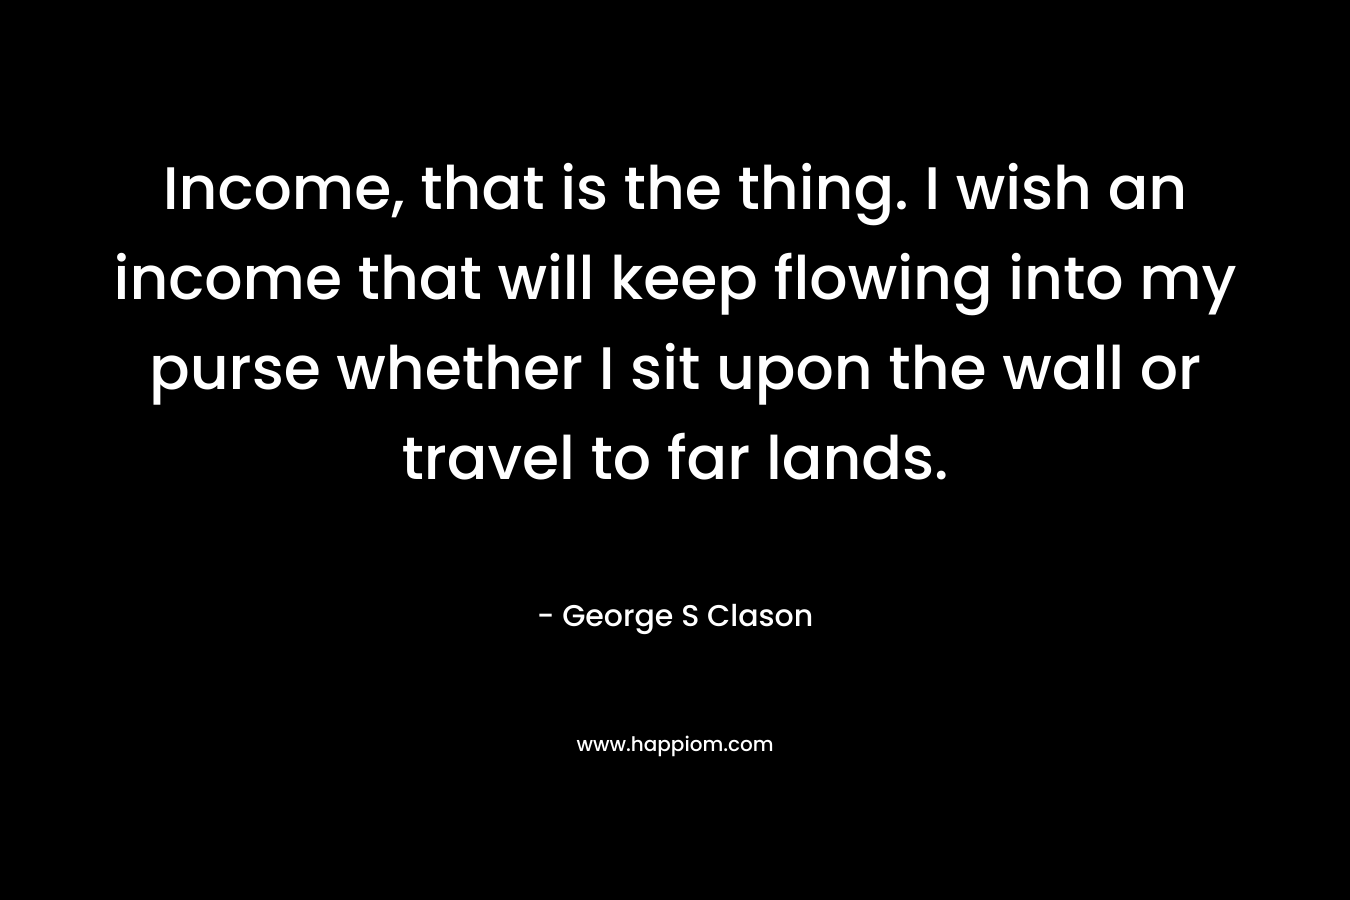 Income, that is the thing. I wish an income that will keep flowing into my purse whether I sit upon the wall or travel to far lands. – George S Clason